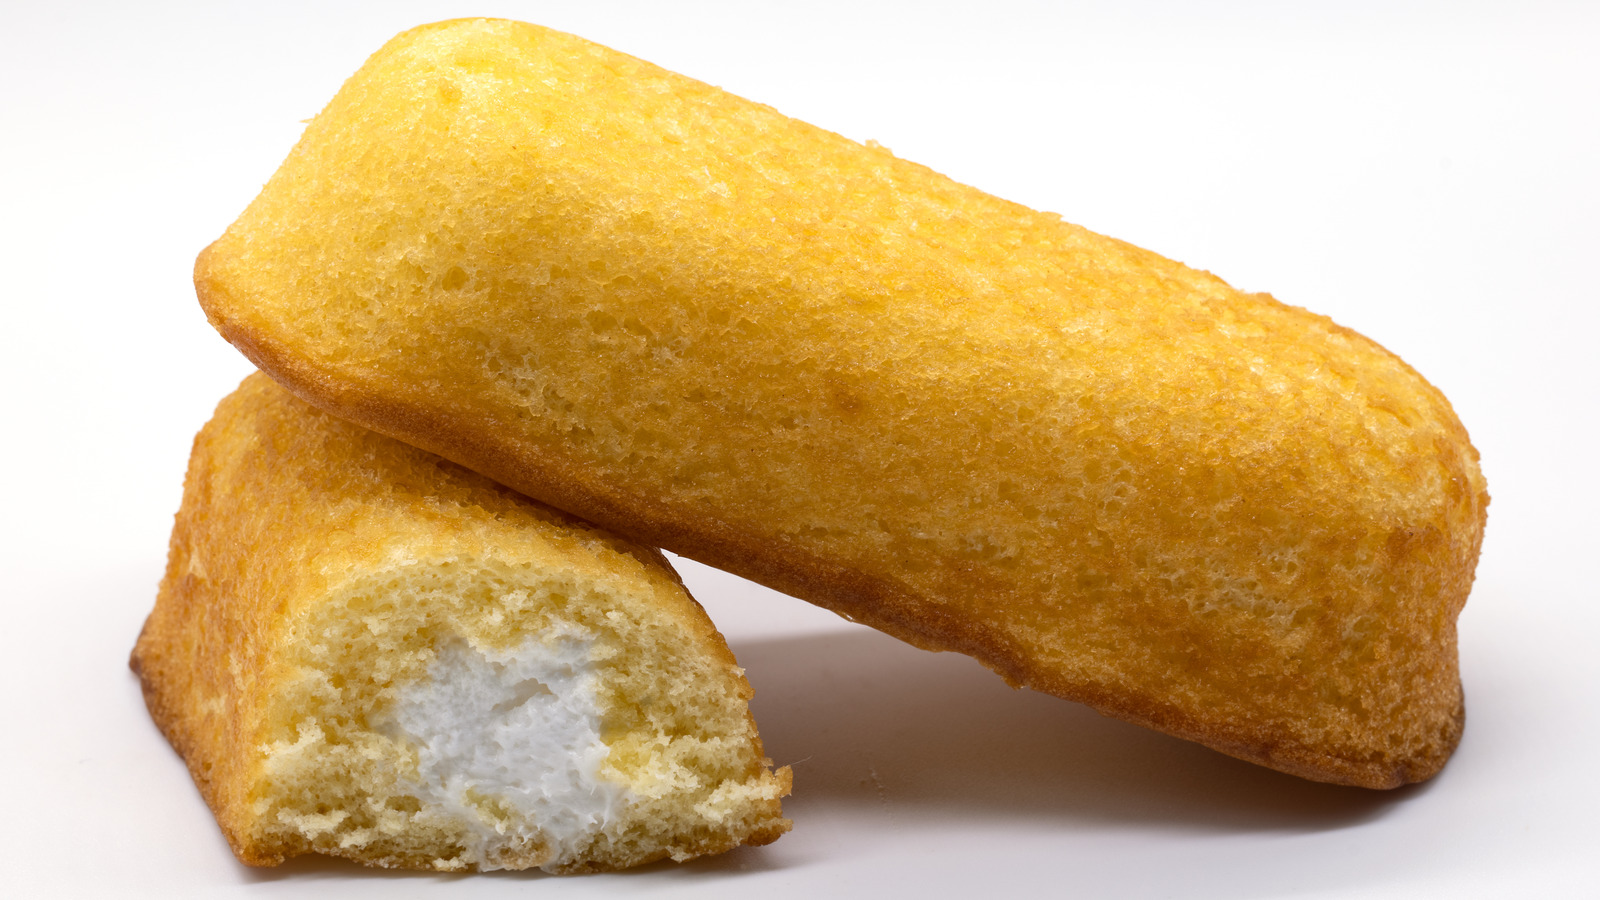 https://www.tastingtable.com/img/gallery/what-are-the-creamy-centers-of-twinkies-made-of/l-intro-1679142972.jpg